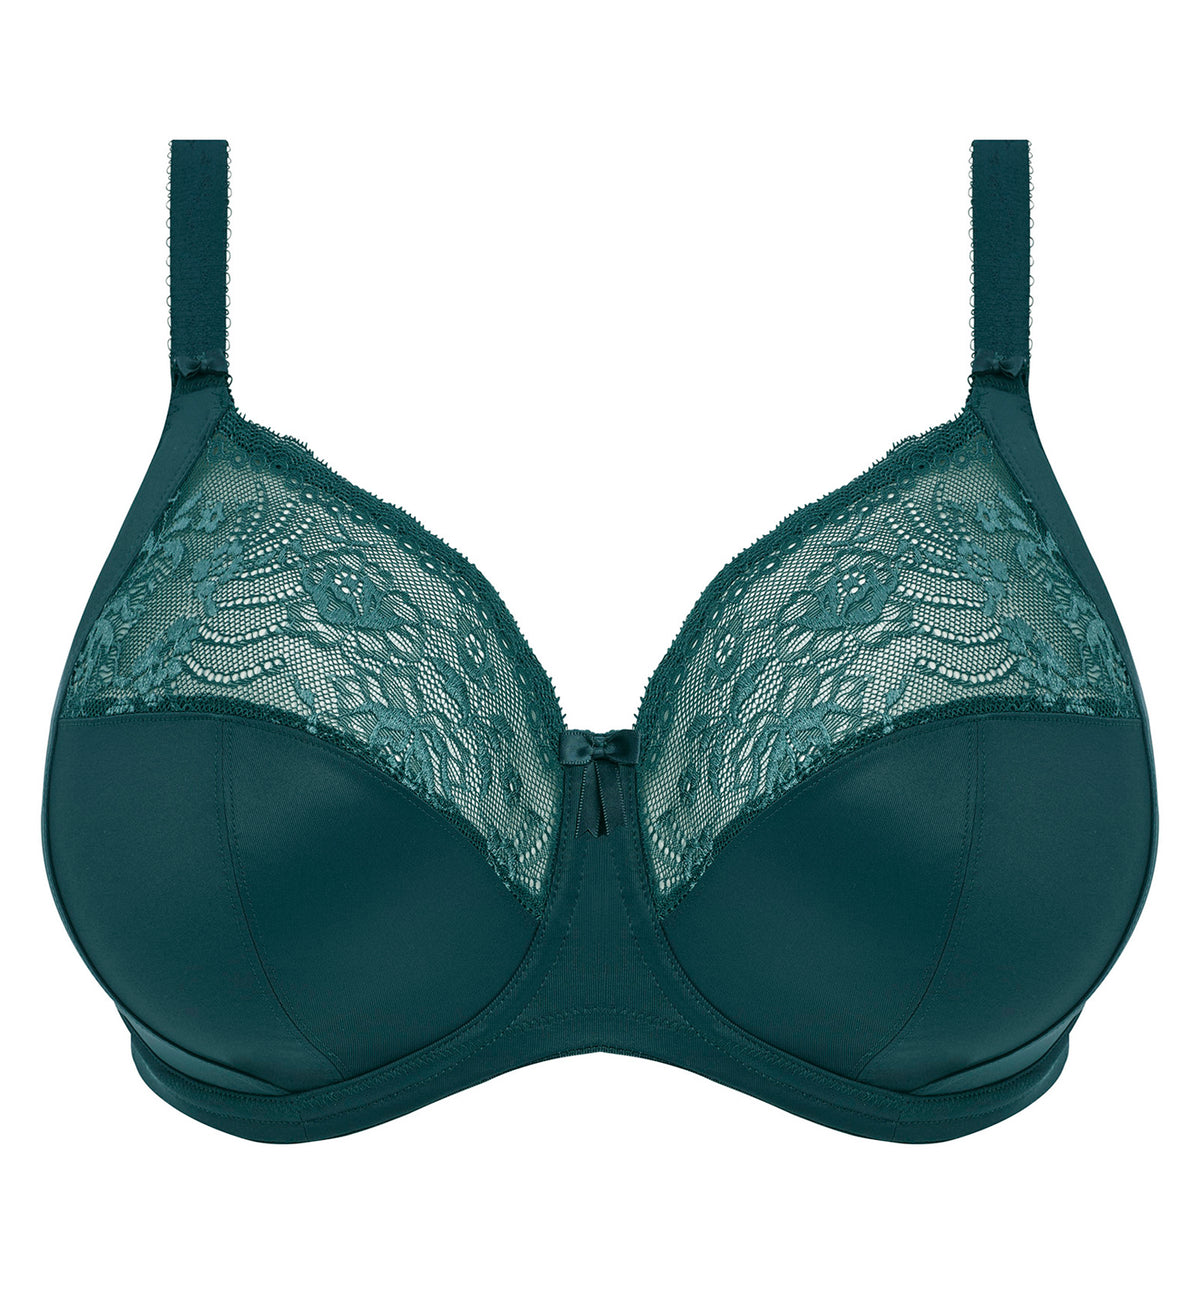 Elomi Morgan Stretch Lace Banded Underwire Bra (4111),32GG,Deep Teal - Deep Teal,32GG